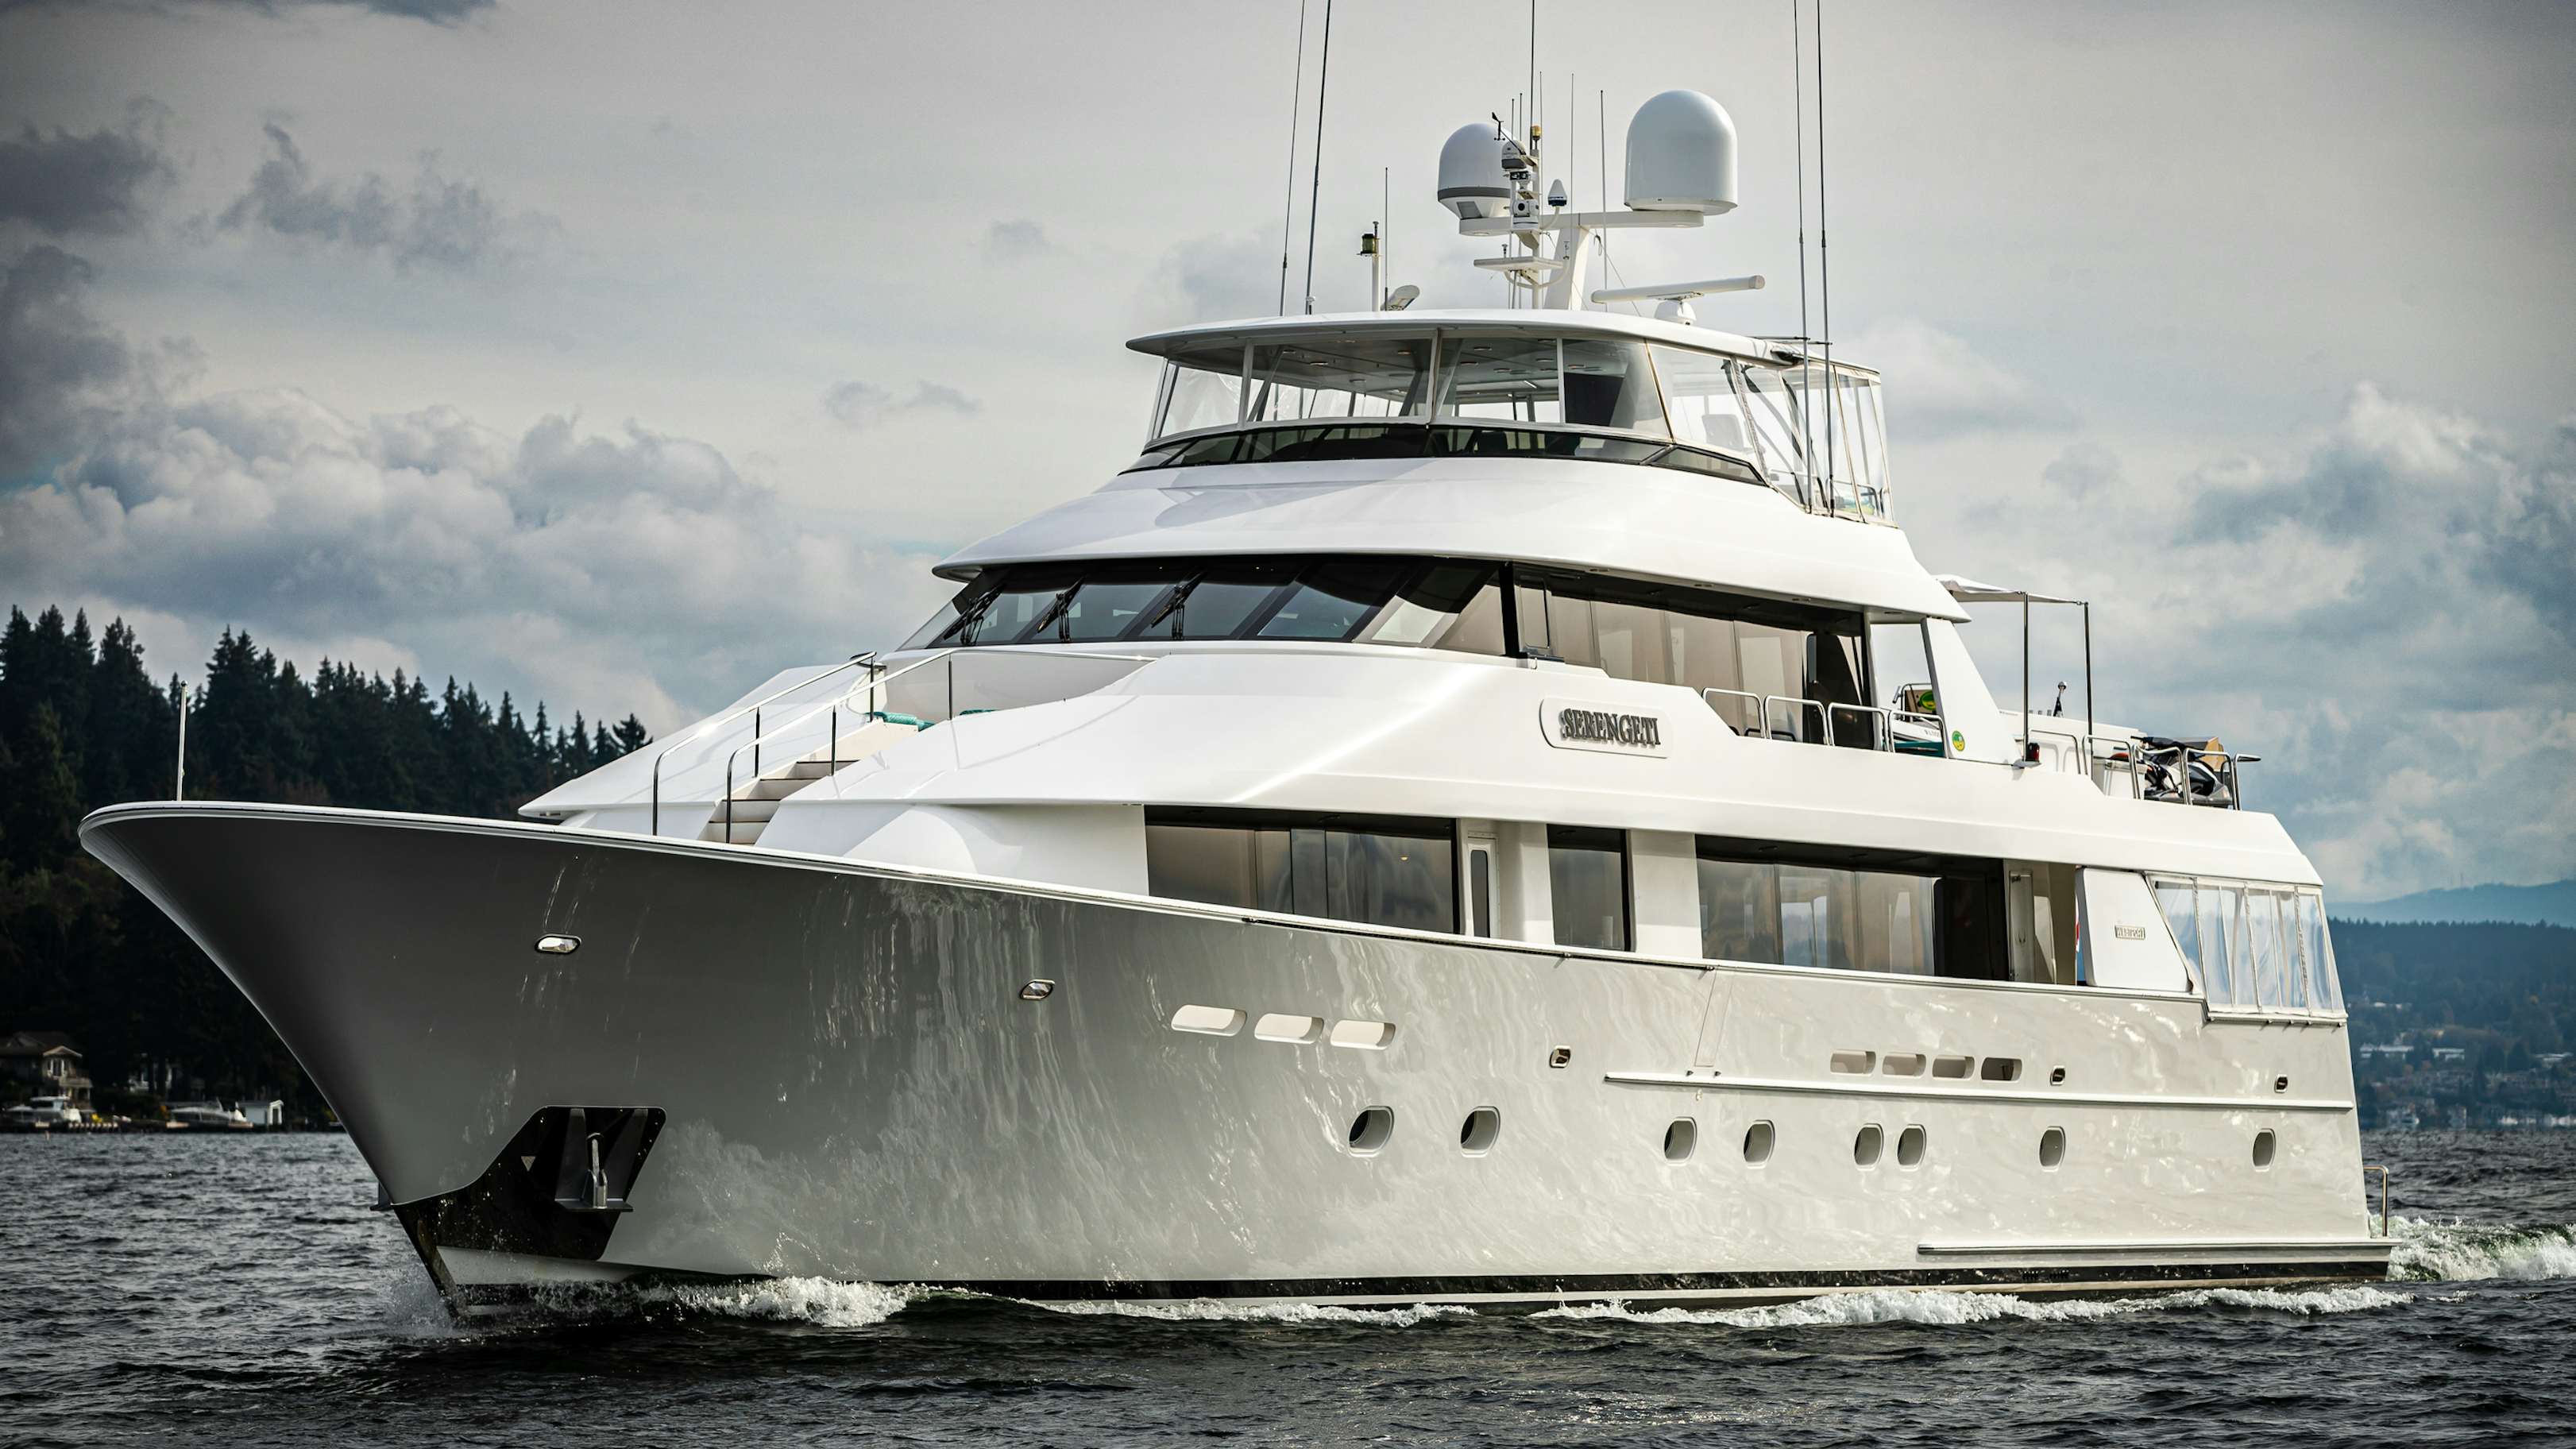 Watch Video for SERENGETI Yacht for Charter